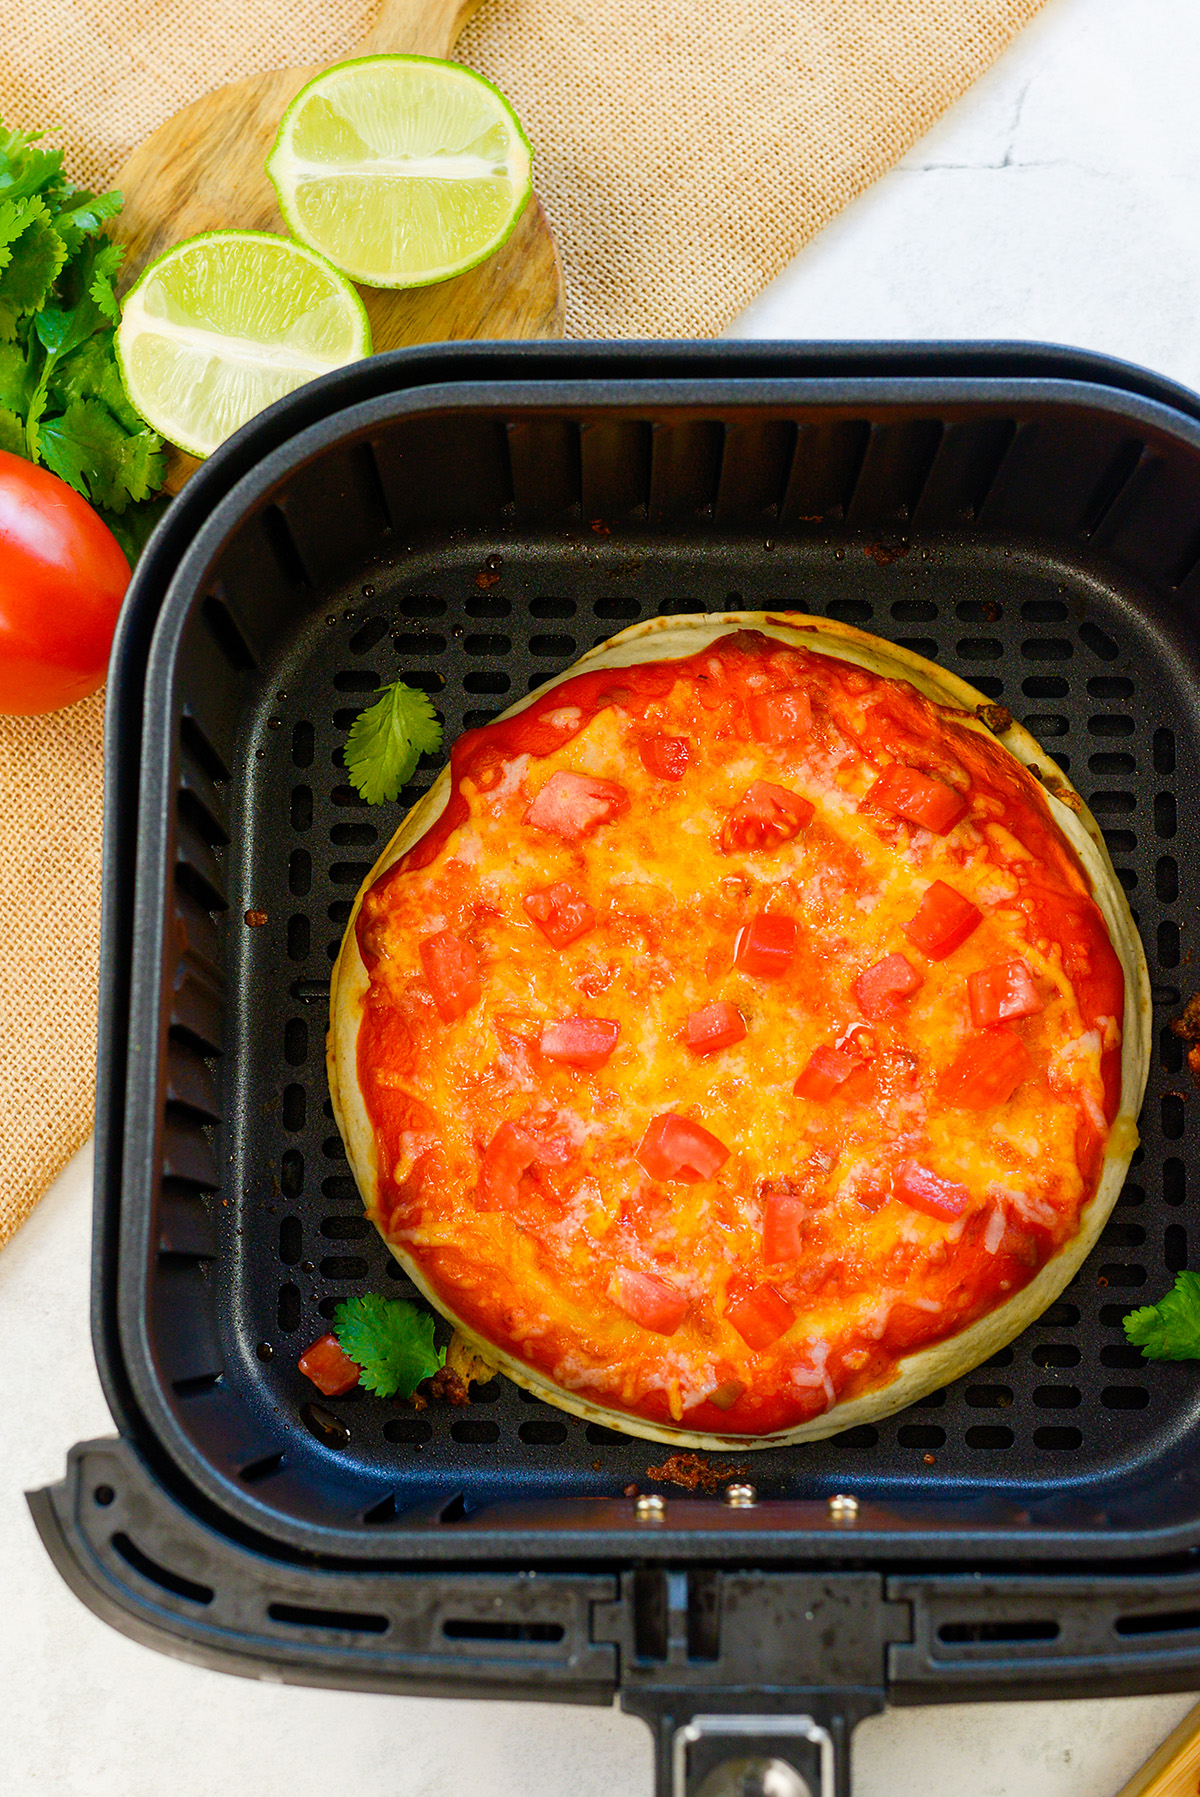 Overhead view of a Mexican pizza in an air fryer basket.